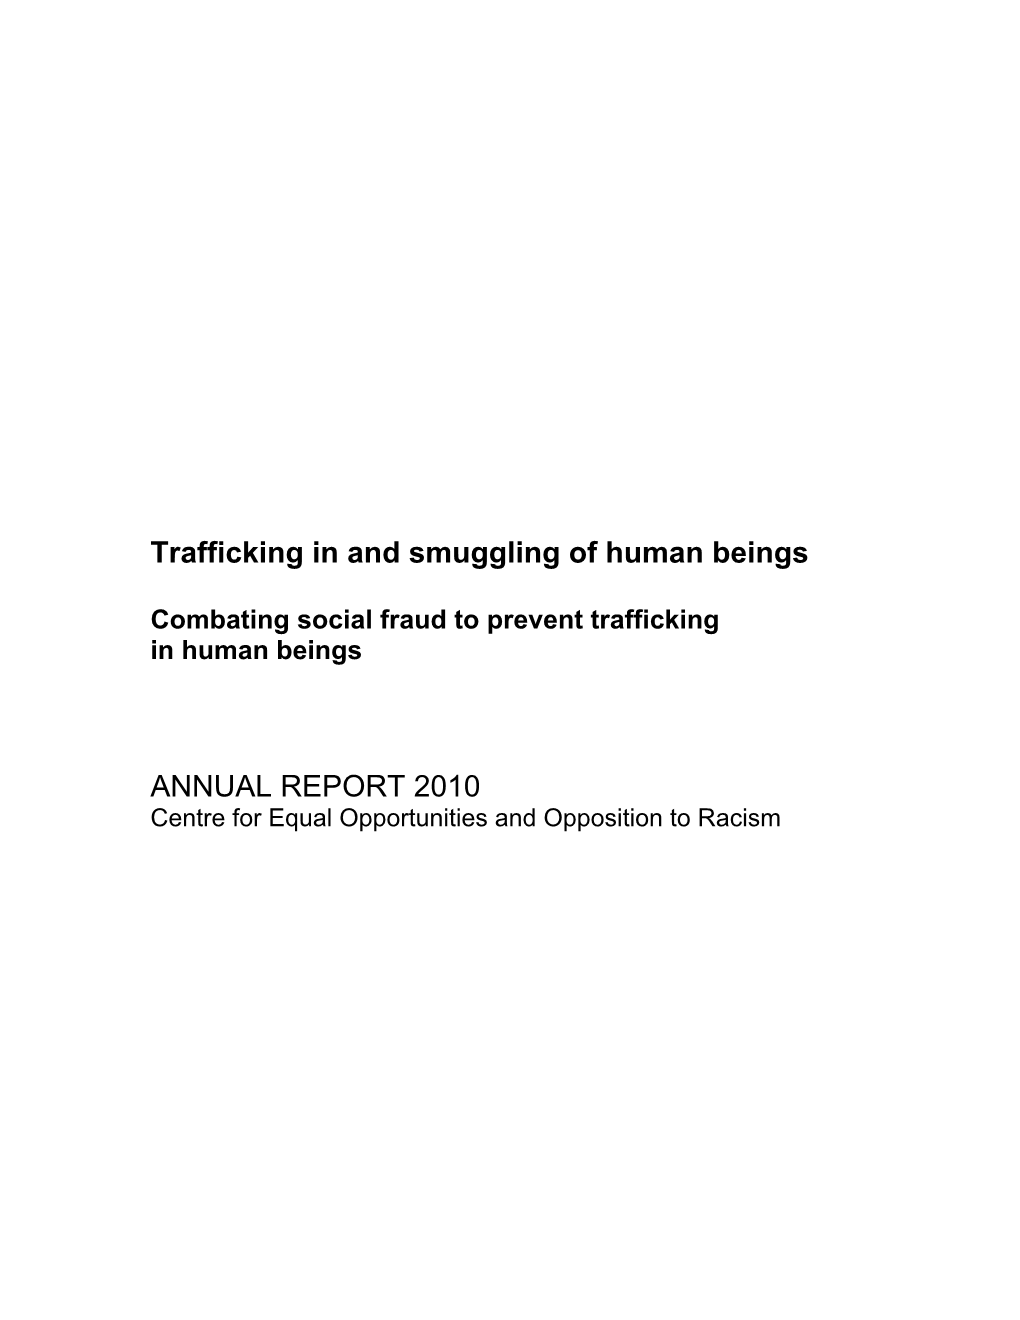 Trafficking in and Smuggling of Human Beings ANNUAL REPORT 2010